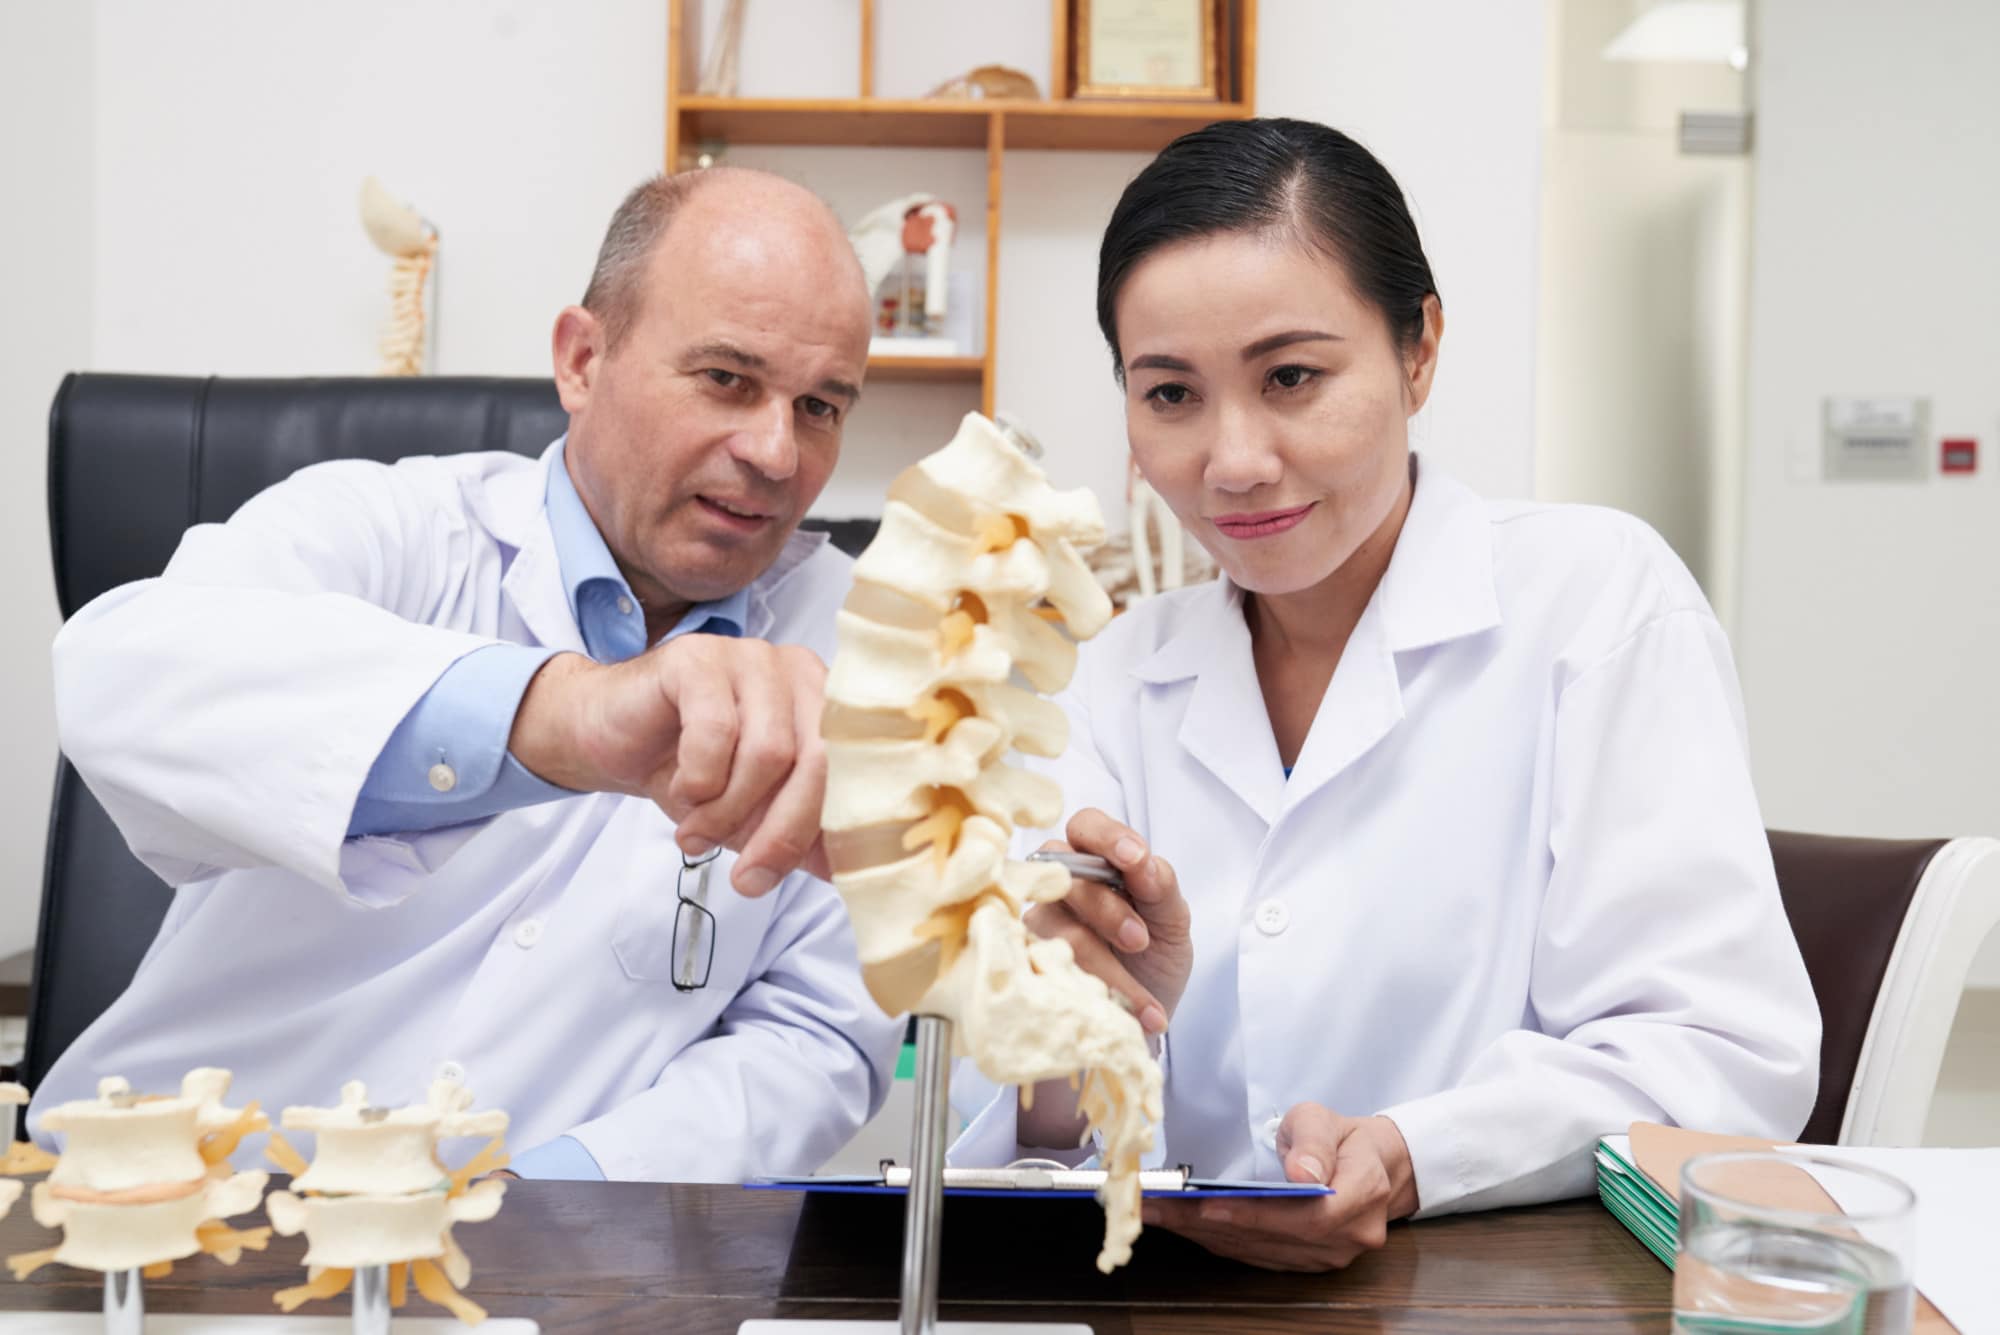 What is Osteoporosis: Diagnosis, Treatment and Prevention